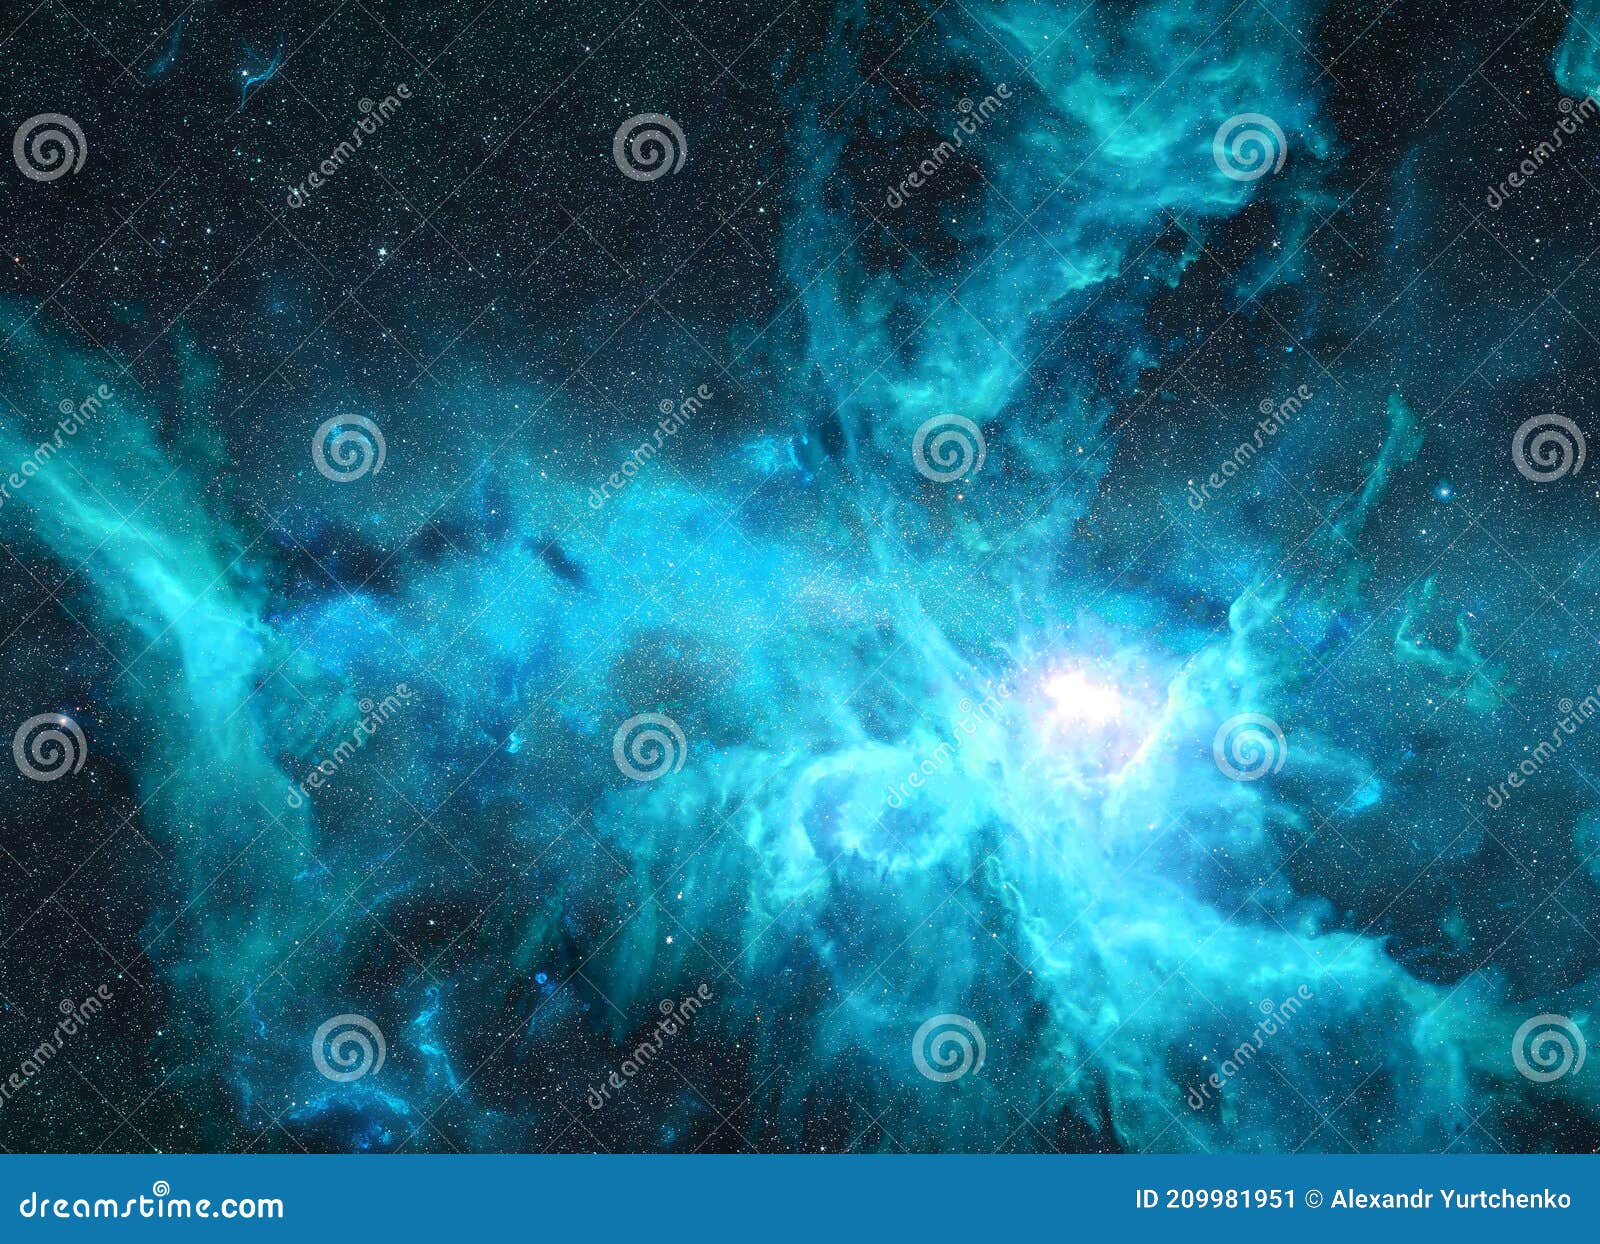 Messier 78 A Reflection Nebula in Orion Space Wallpaper  Space